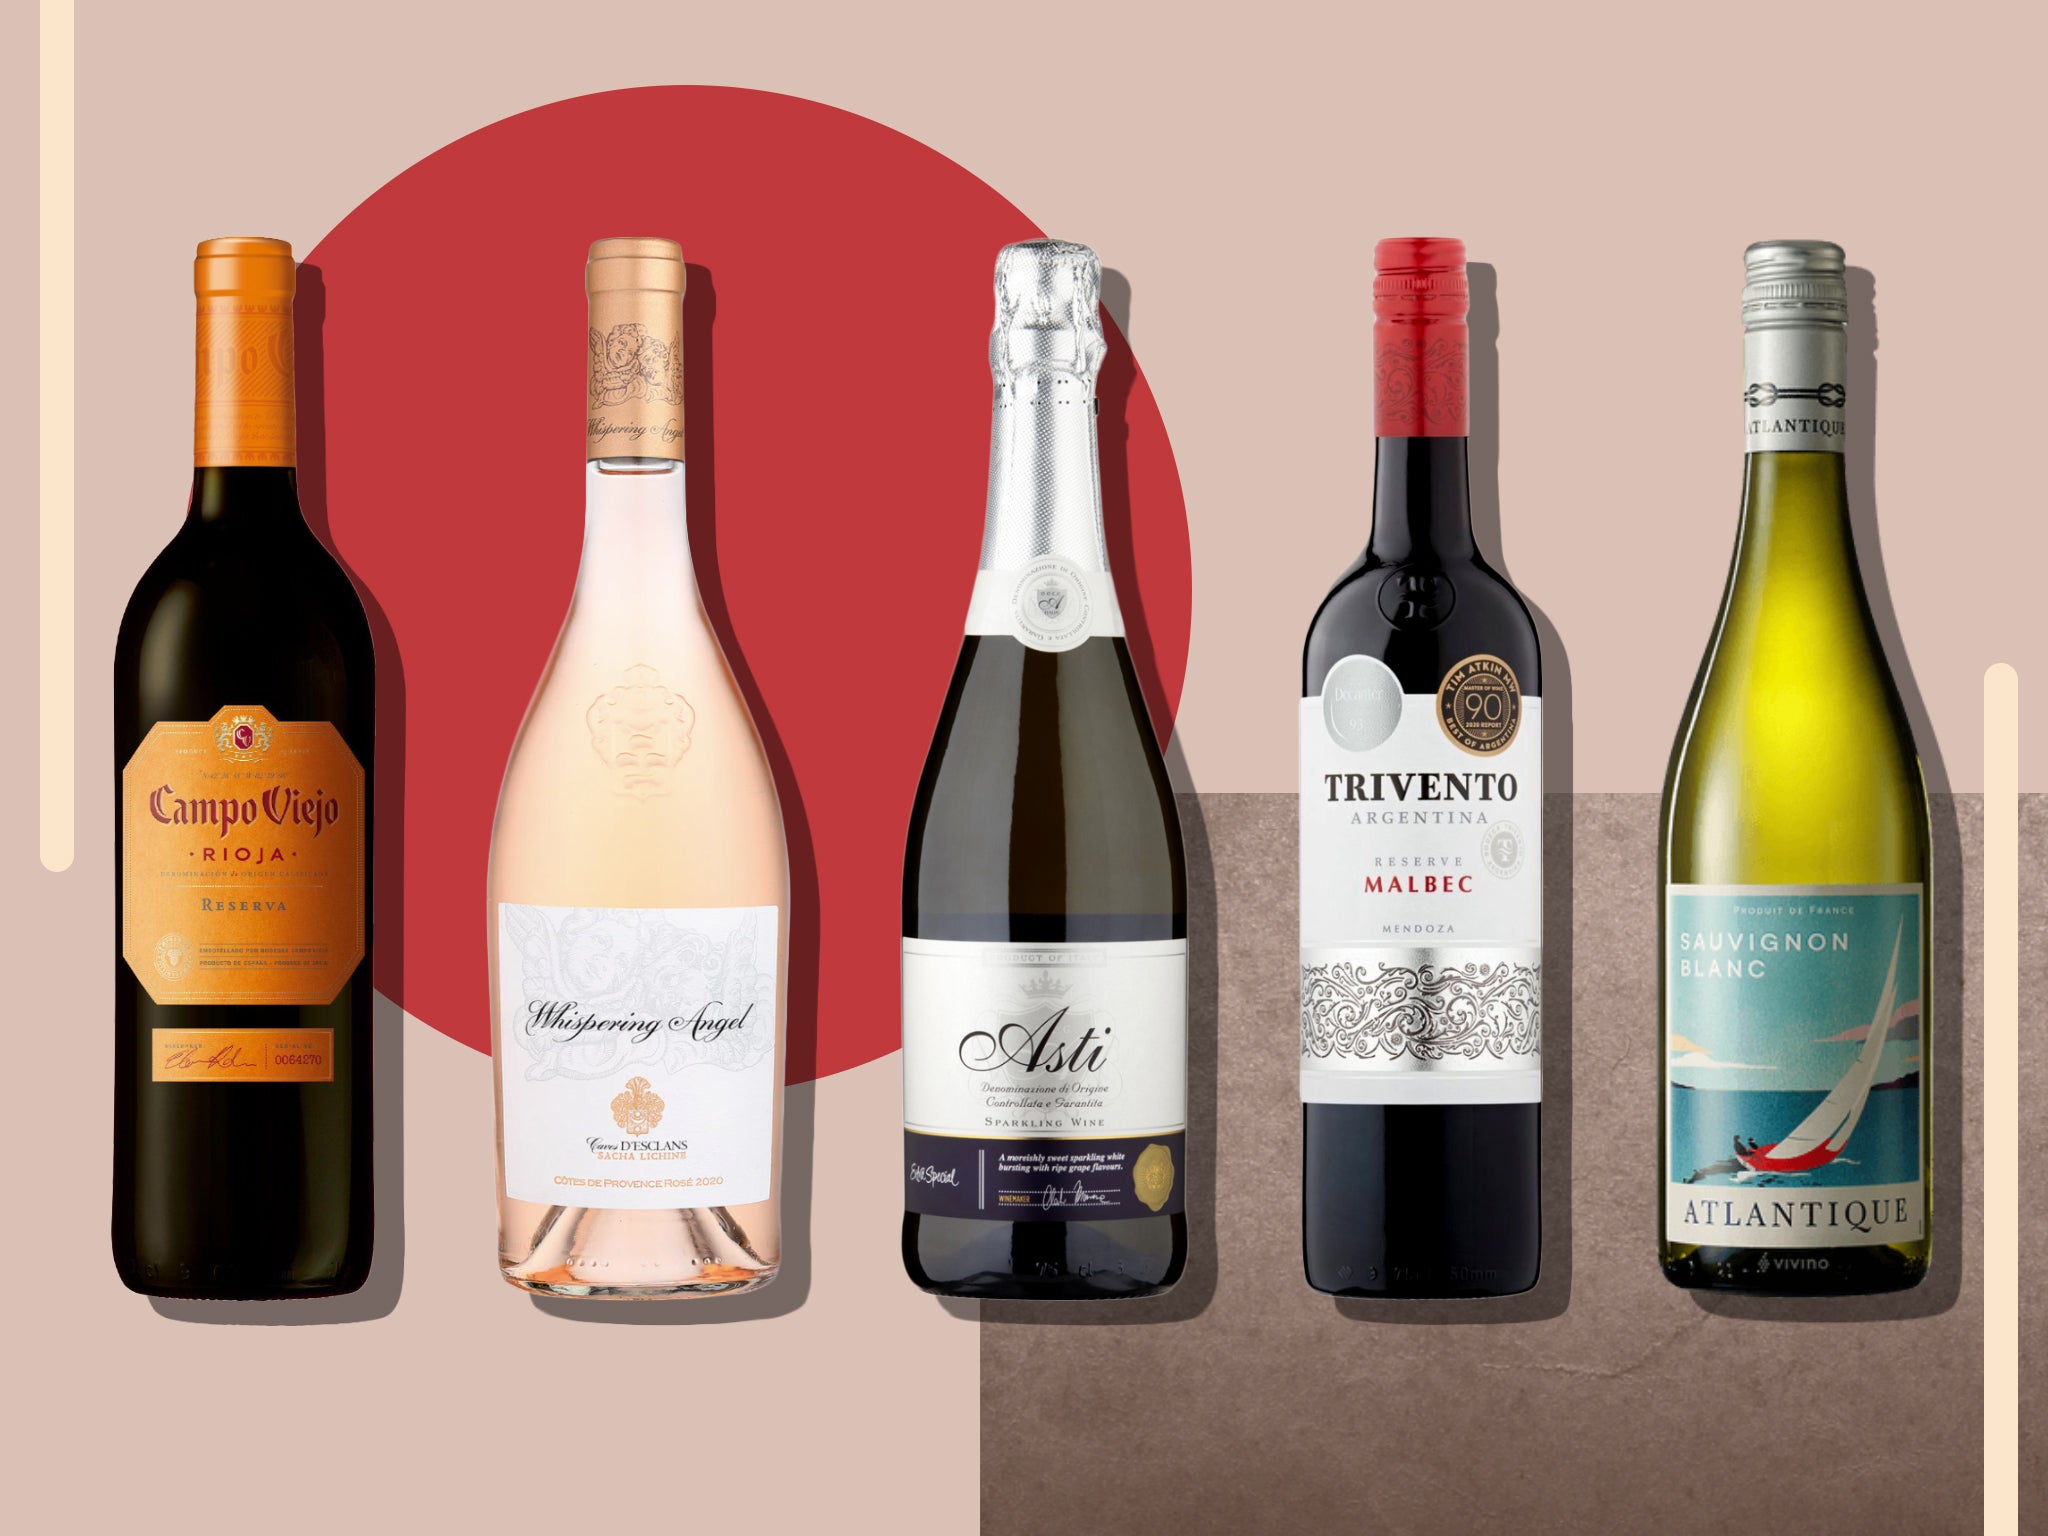 The best wine deals this month: Bargain bottles to sip and save on